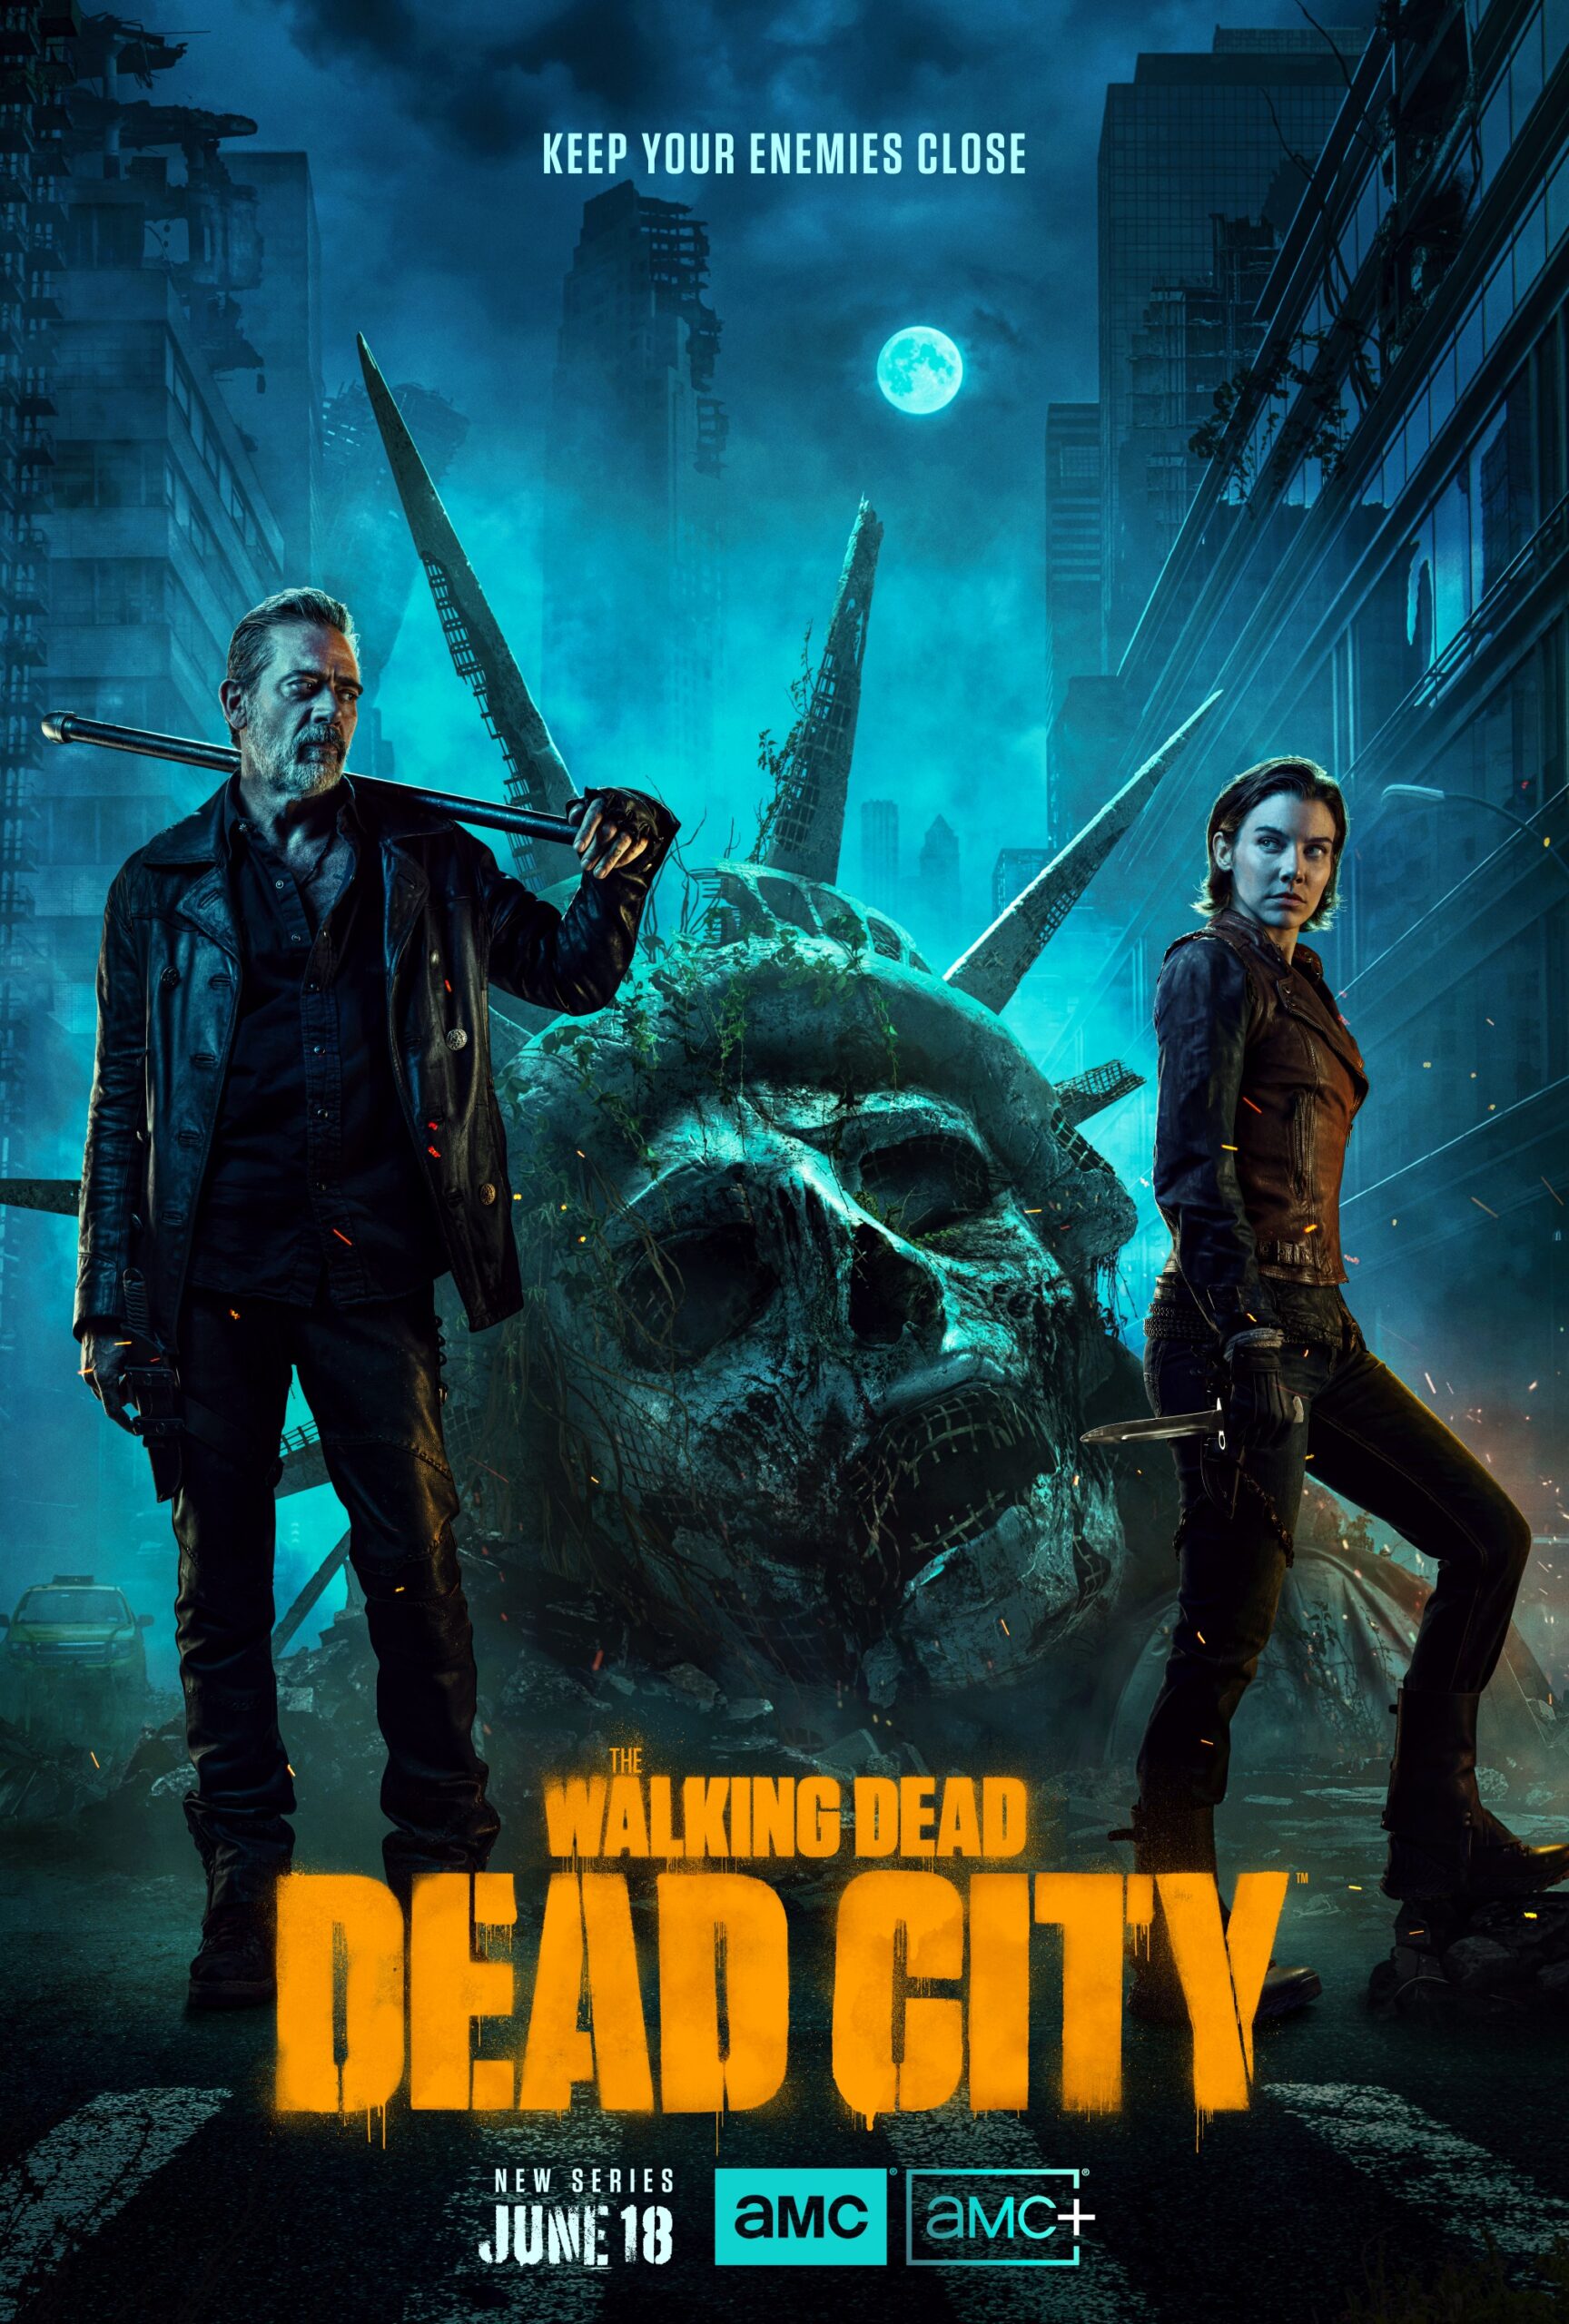 The Walking Dead Dead City Maggie And Negan Take Manhattan In New Trailer Video 7657